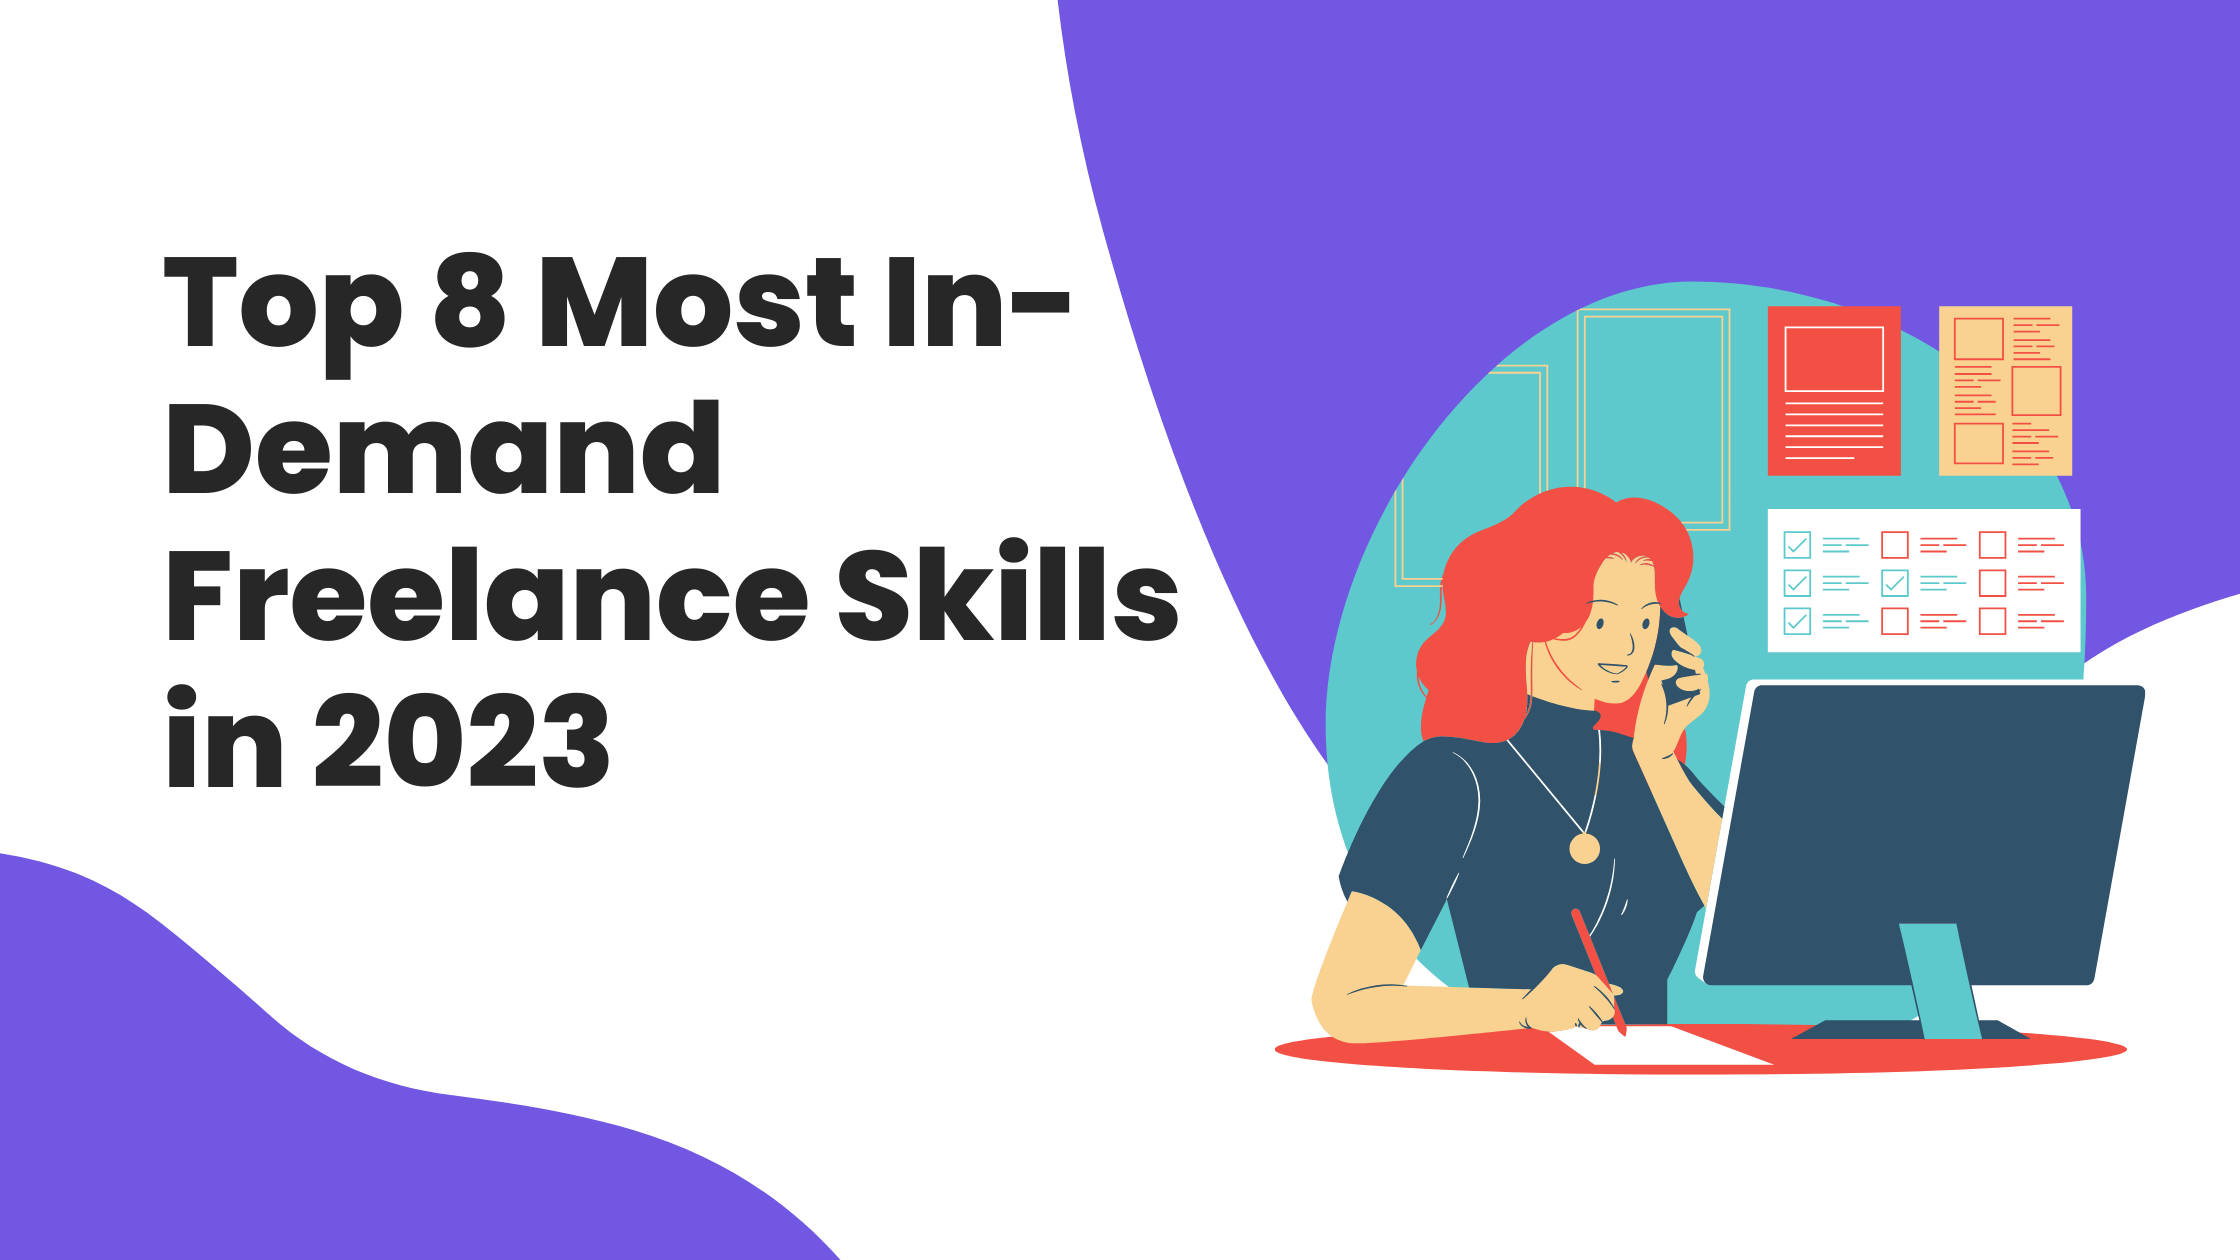 Top 8 Most In-Demand Freelance Skills in 2023 - iNextCRM